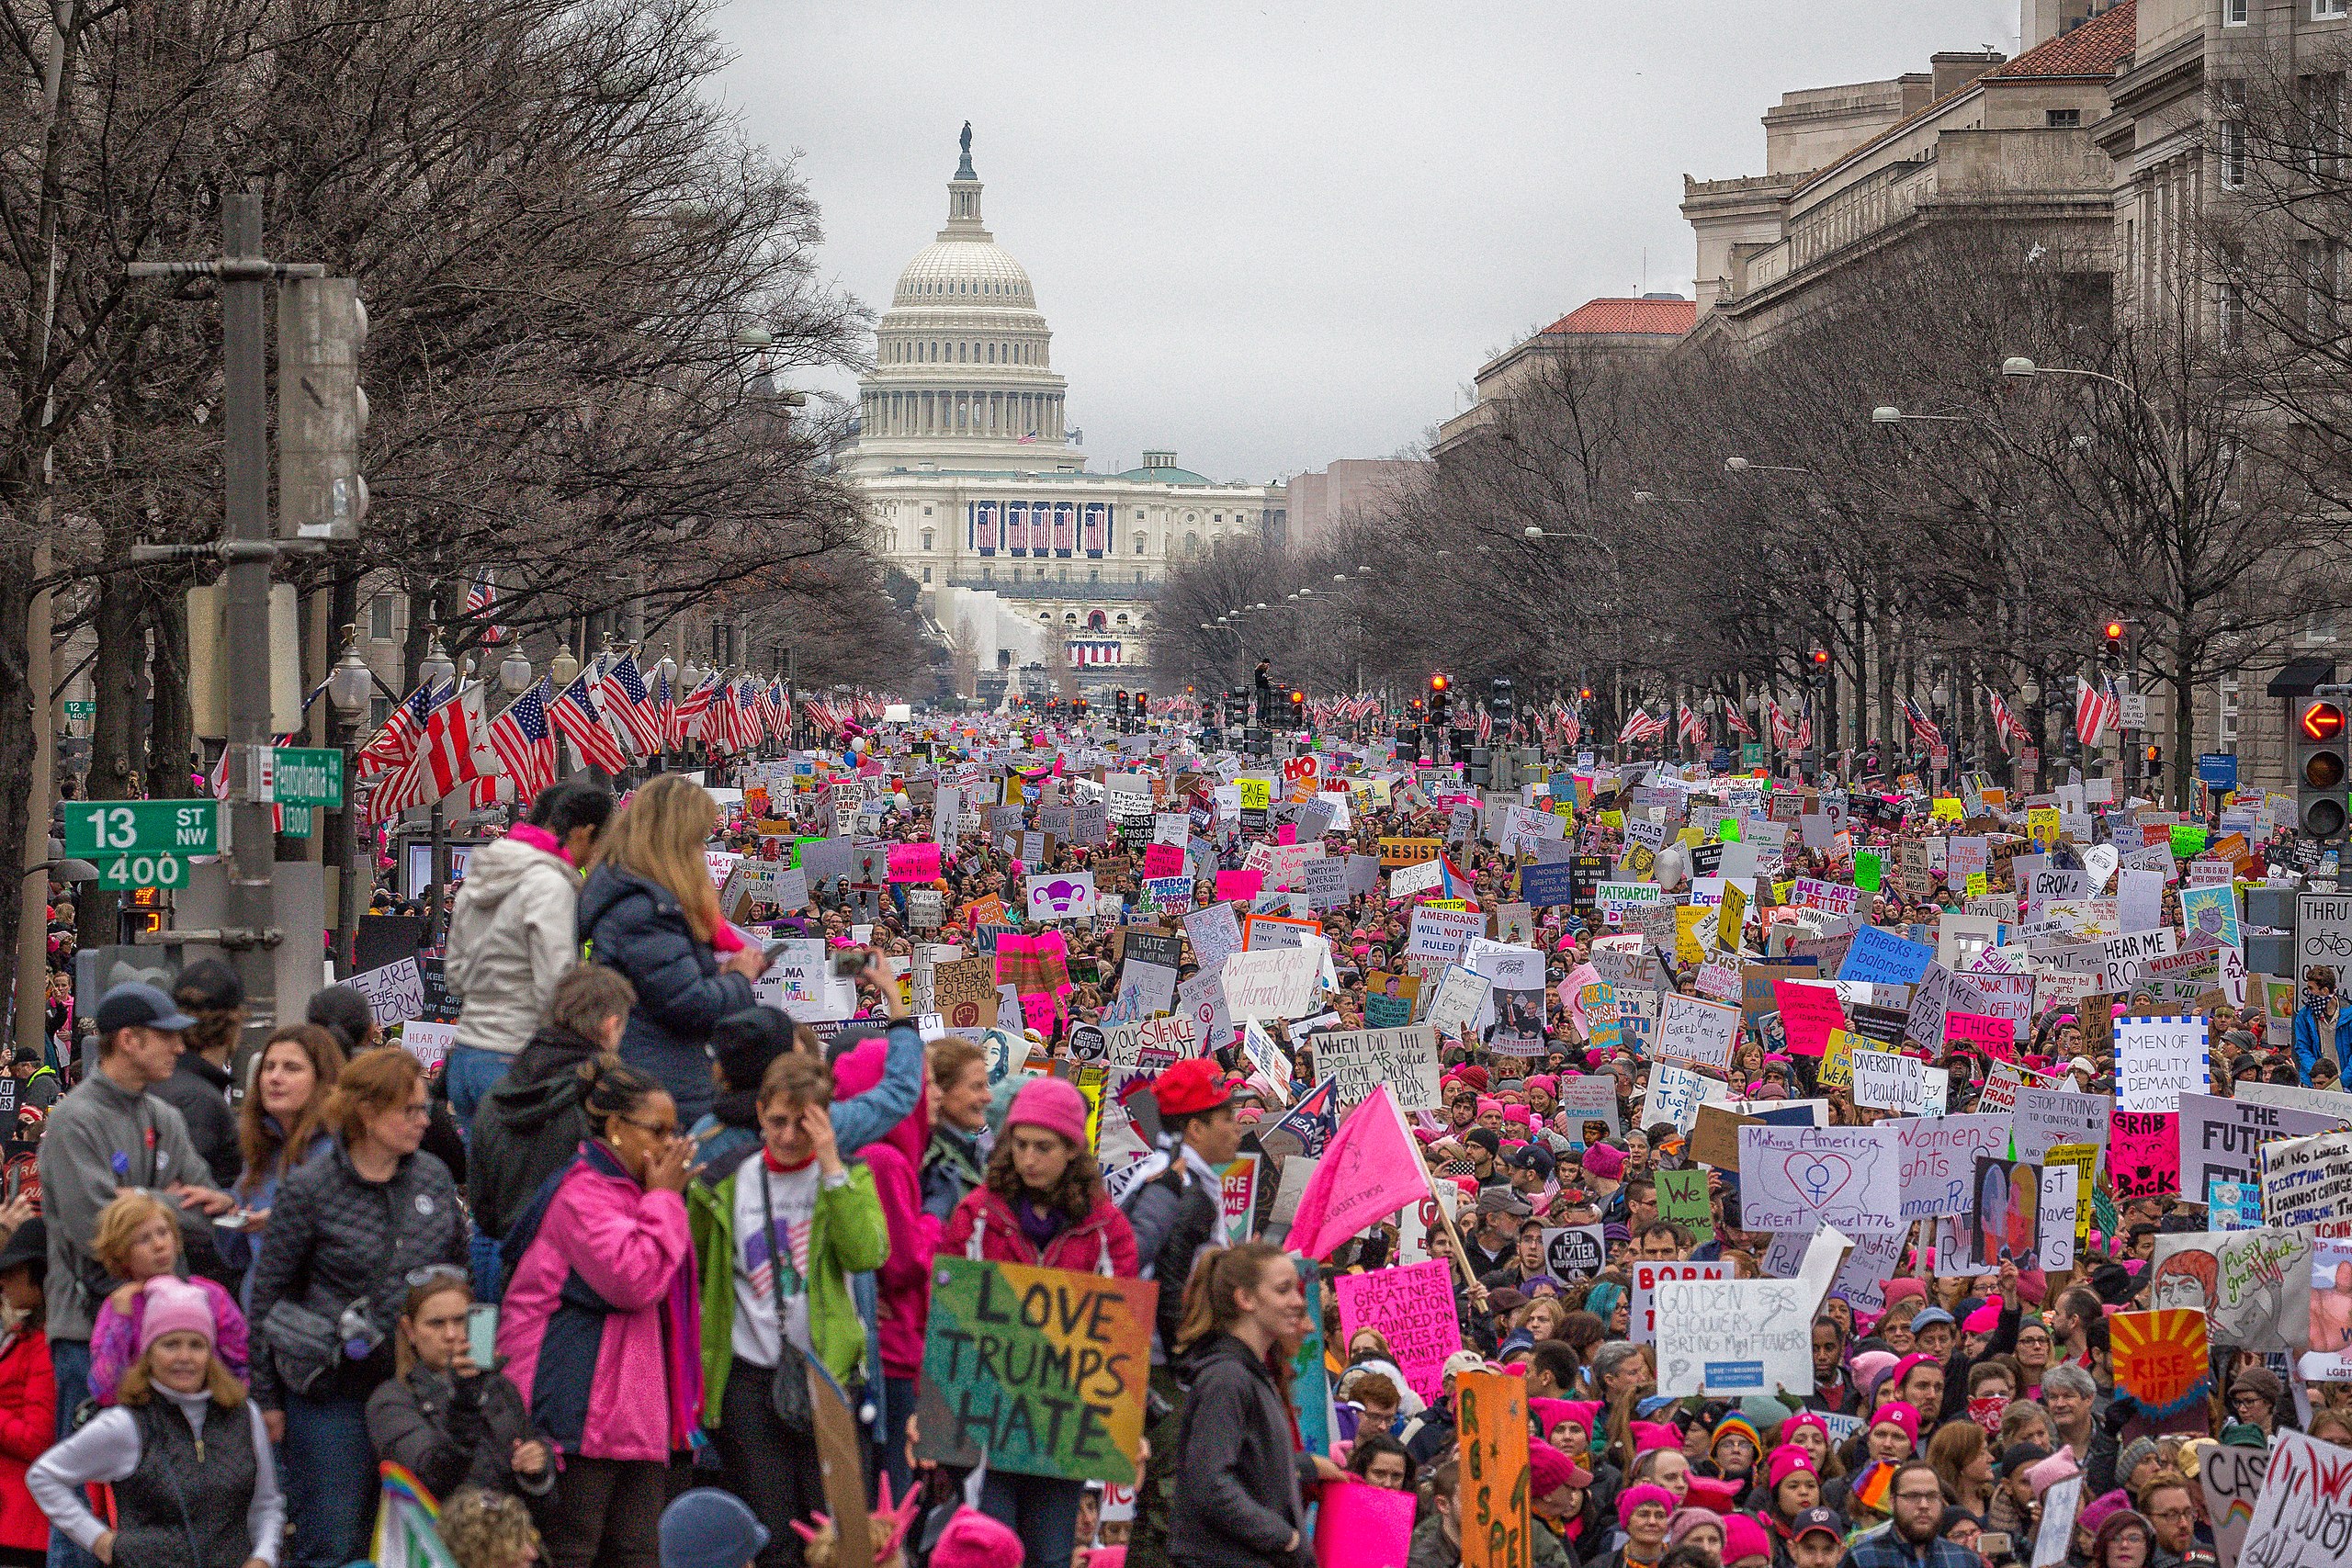 Thousands of women marching on Washington protesting with signs and pink hats